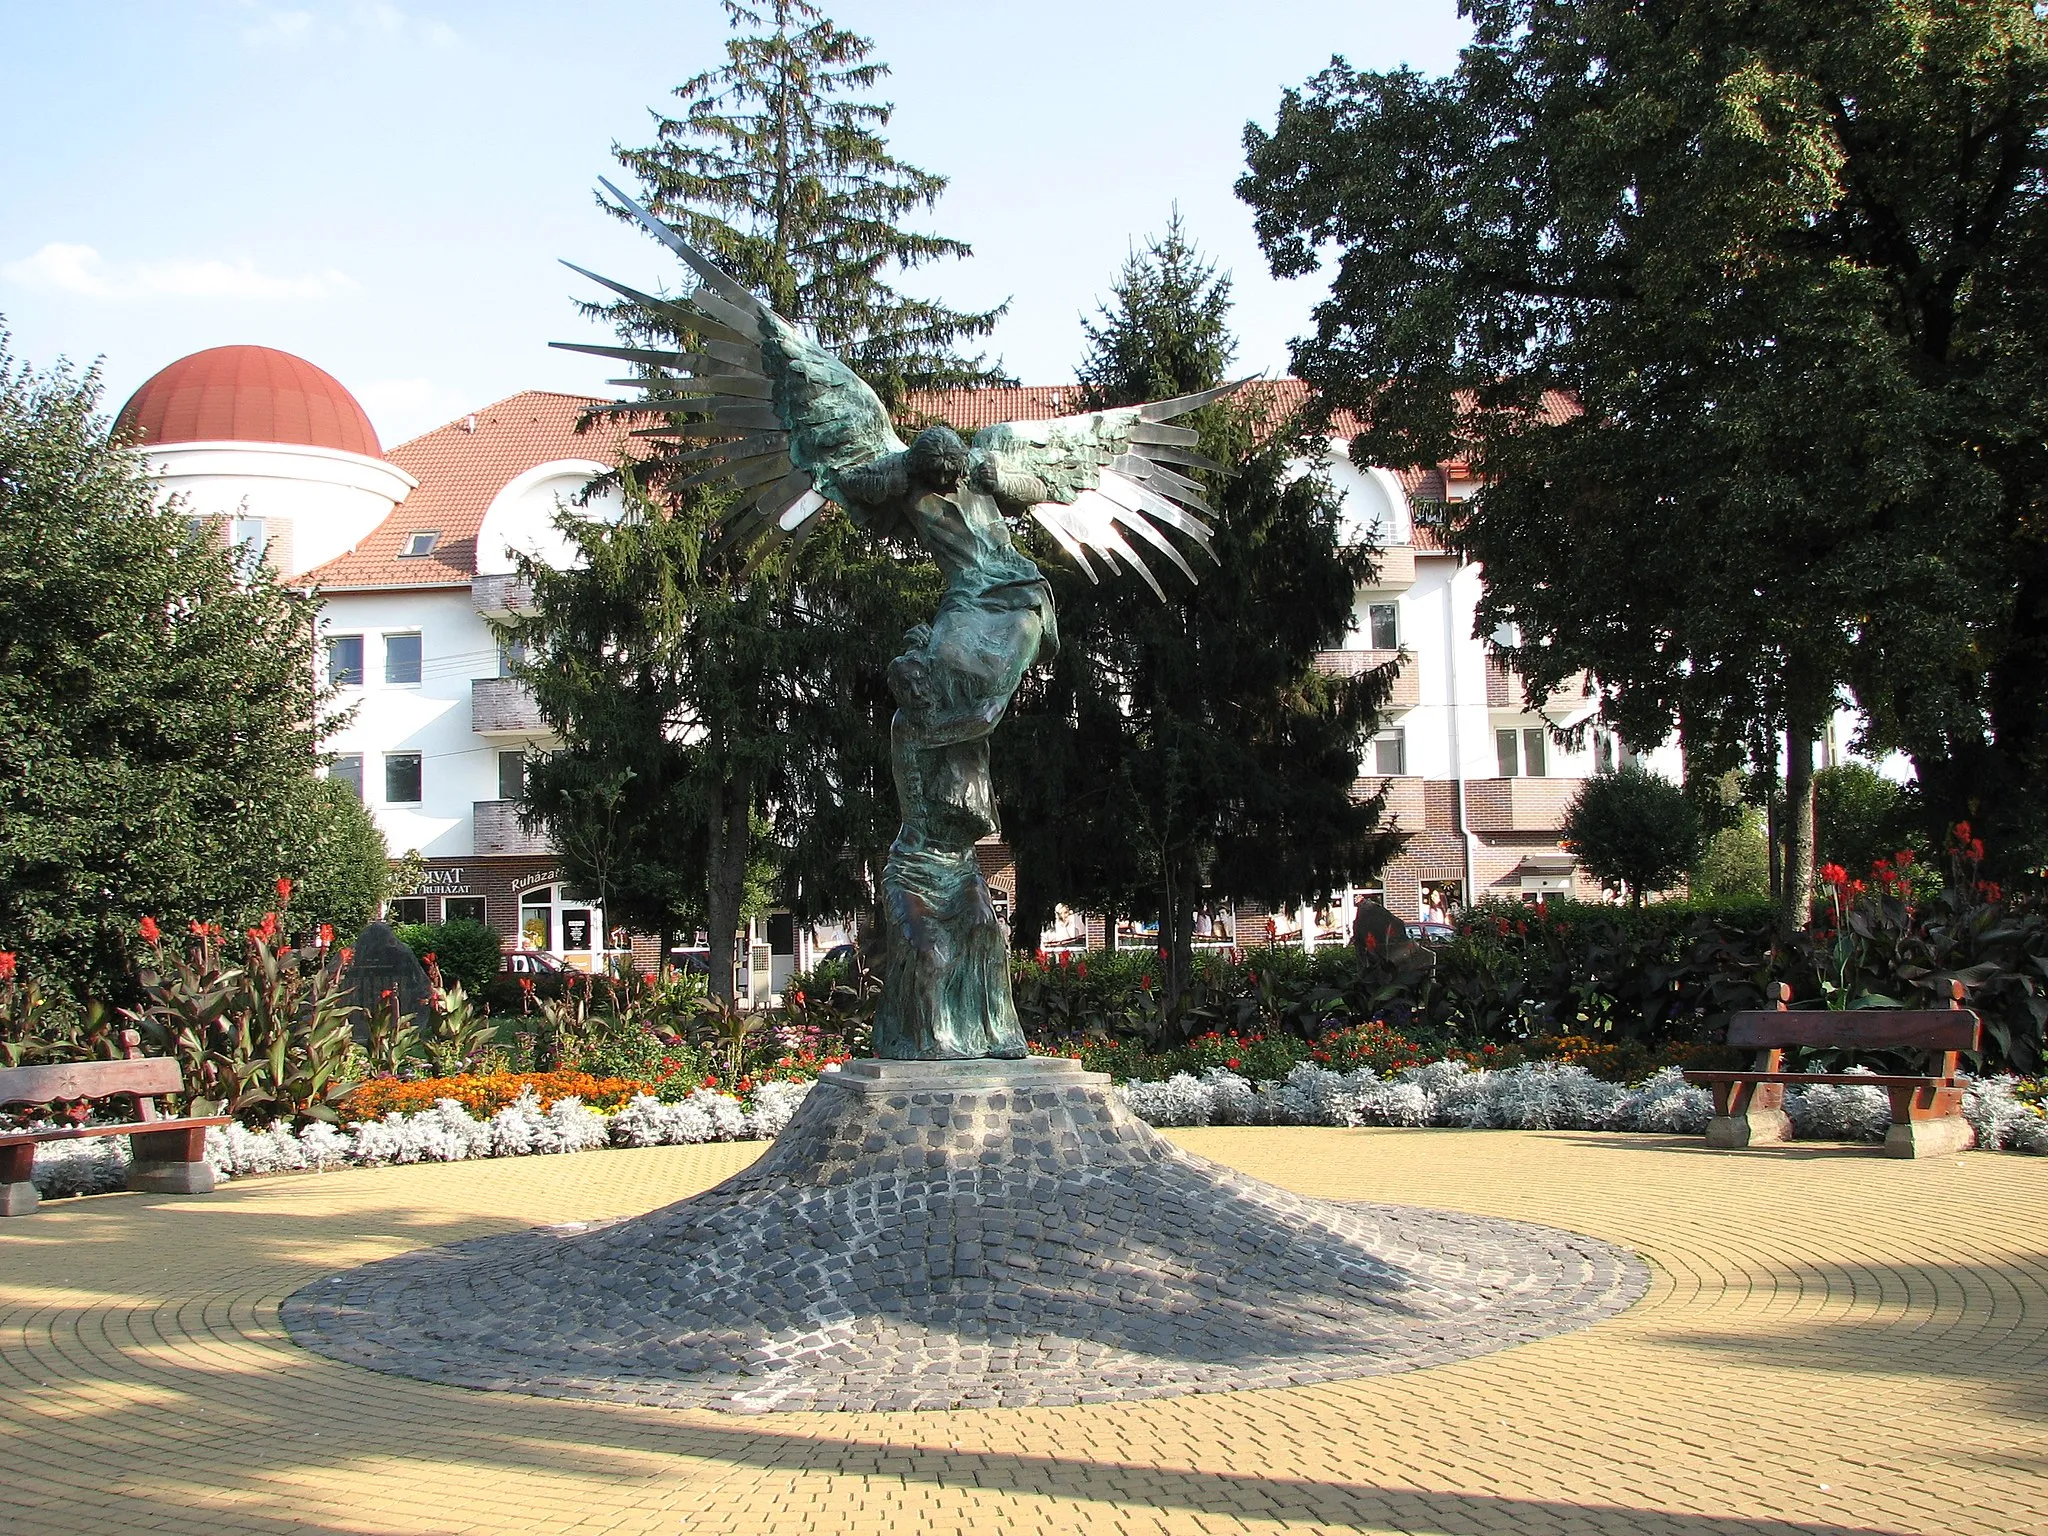 Photo showing: The main square (Vasvári Pál tér) of Hajdúdorog, Hungary. In the middle of the square the statue shows Jacob's wrestling with the Angel. The statue was erected in 1992 on the place of the Soviet soldiers' monument.